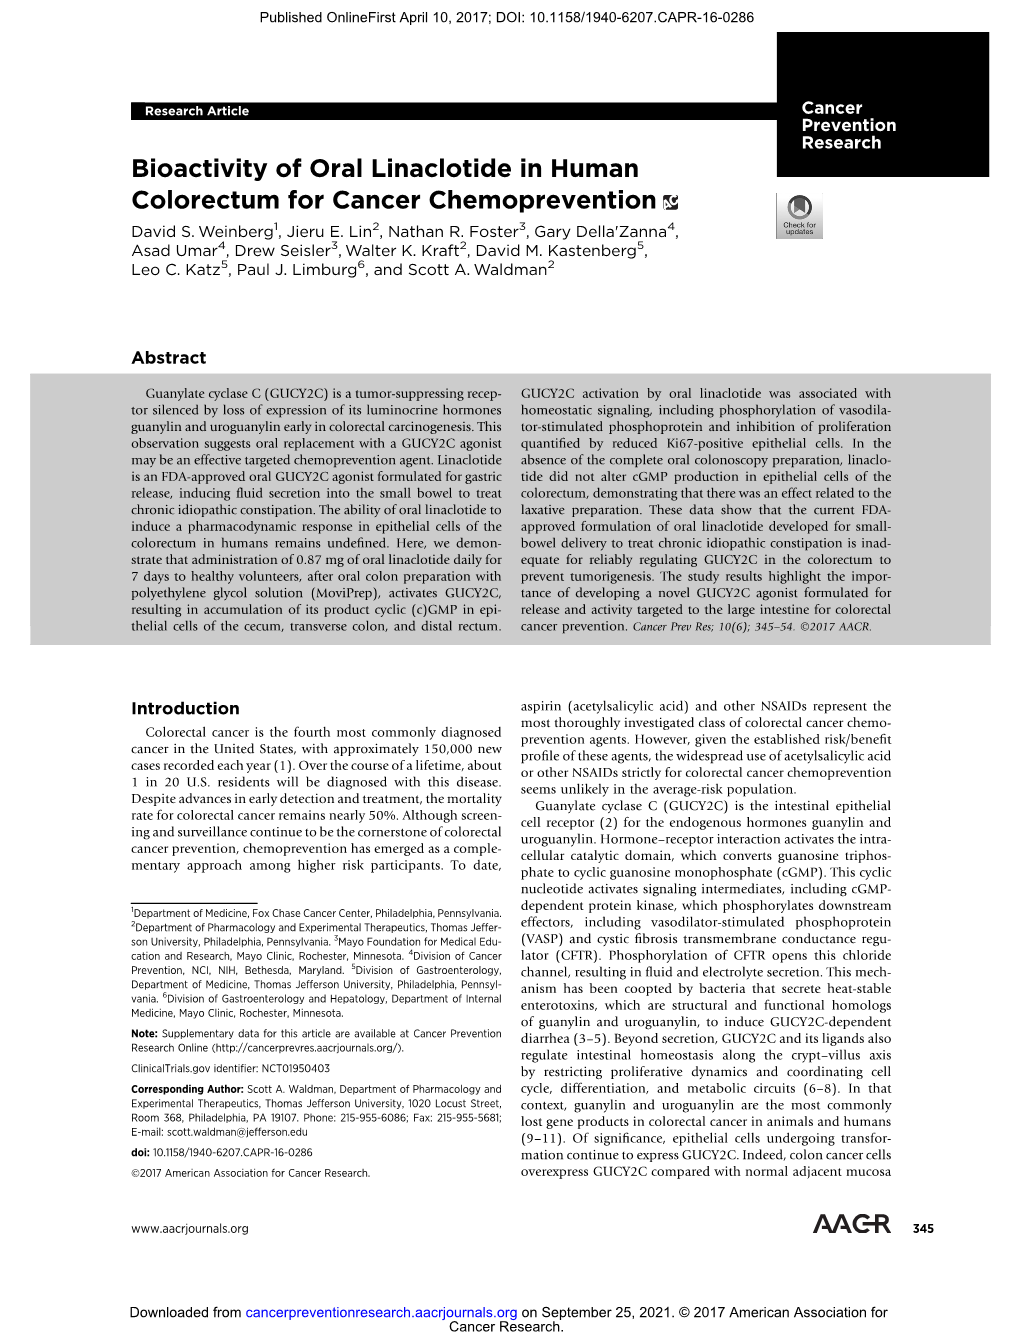 Bioactivity of Oral Linaclotide in Human Colorectum for Cancer Chemoprevention David S